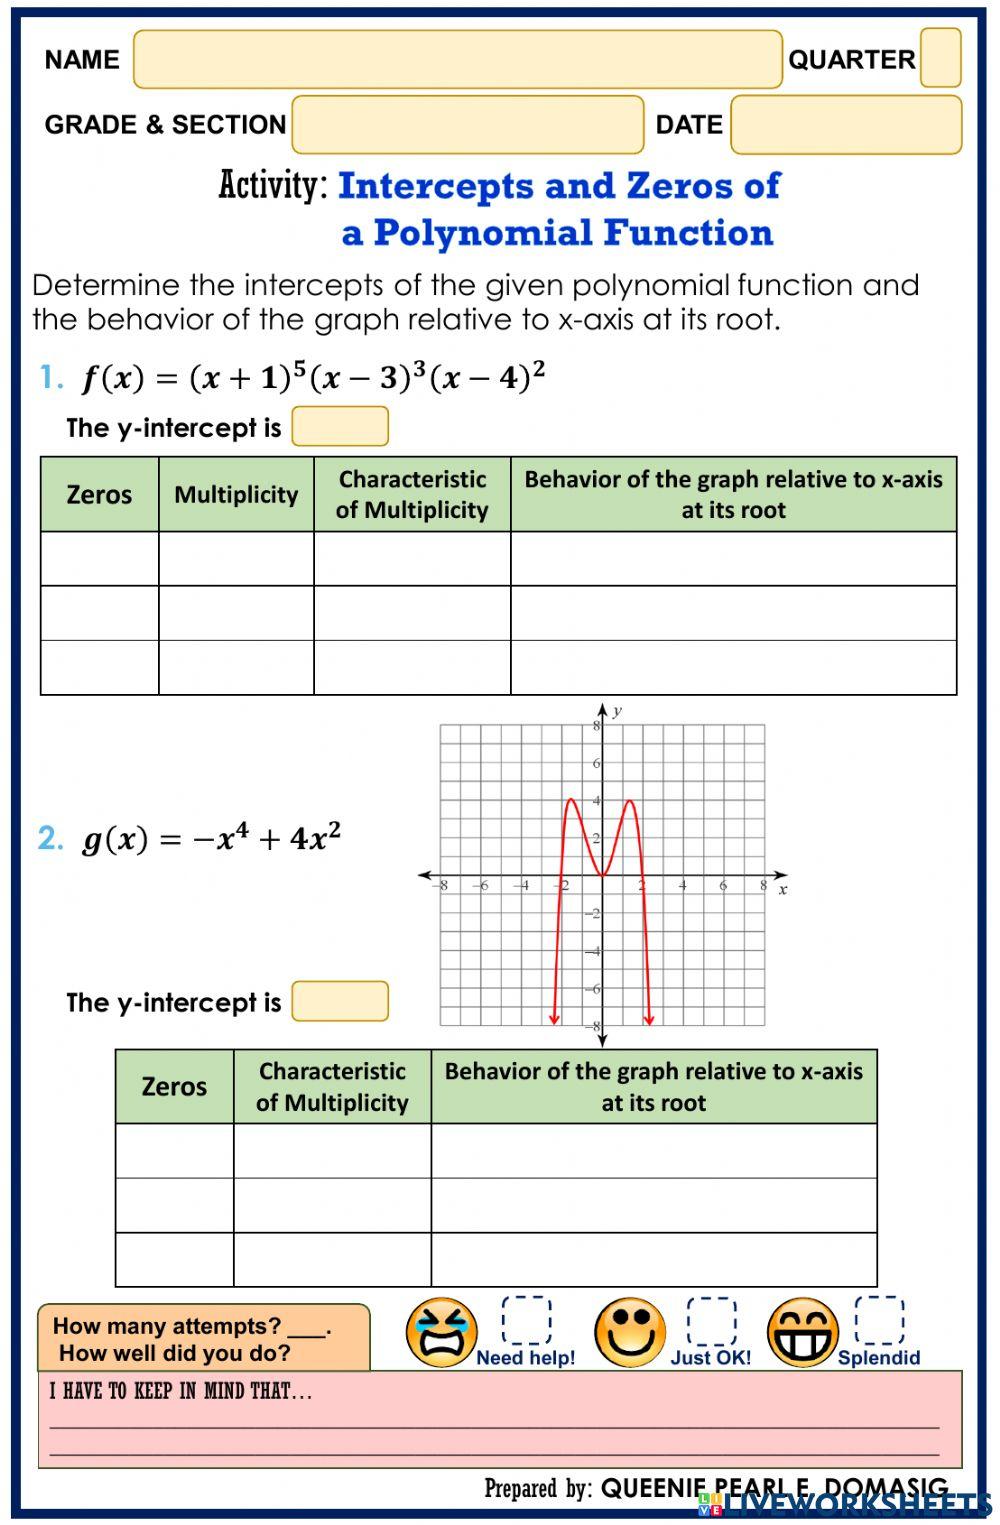 PC 3 Unit Graphing Polynomials Worksheet - PC 3 Unit Graphing Polynomials  Worksheet Directions: Graph the following polynomials. | Course Hero